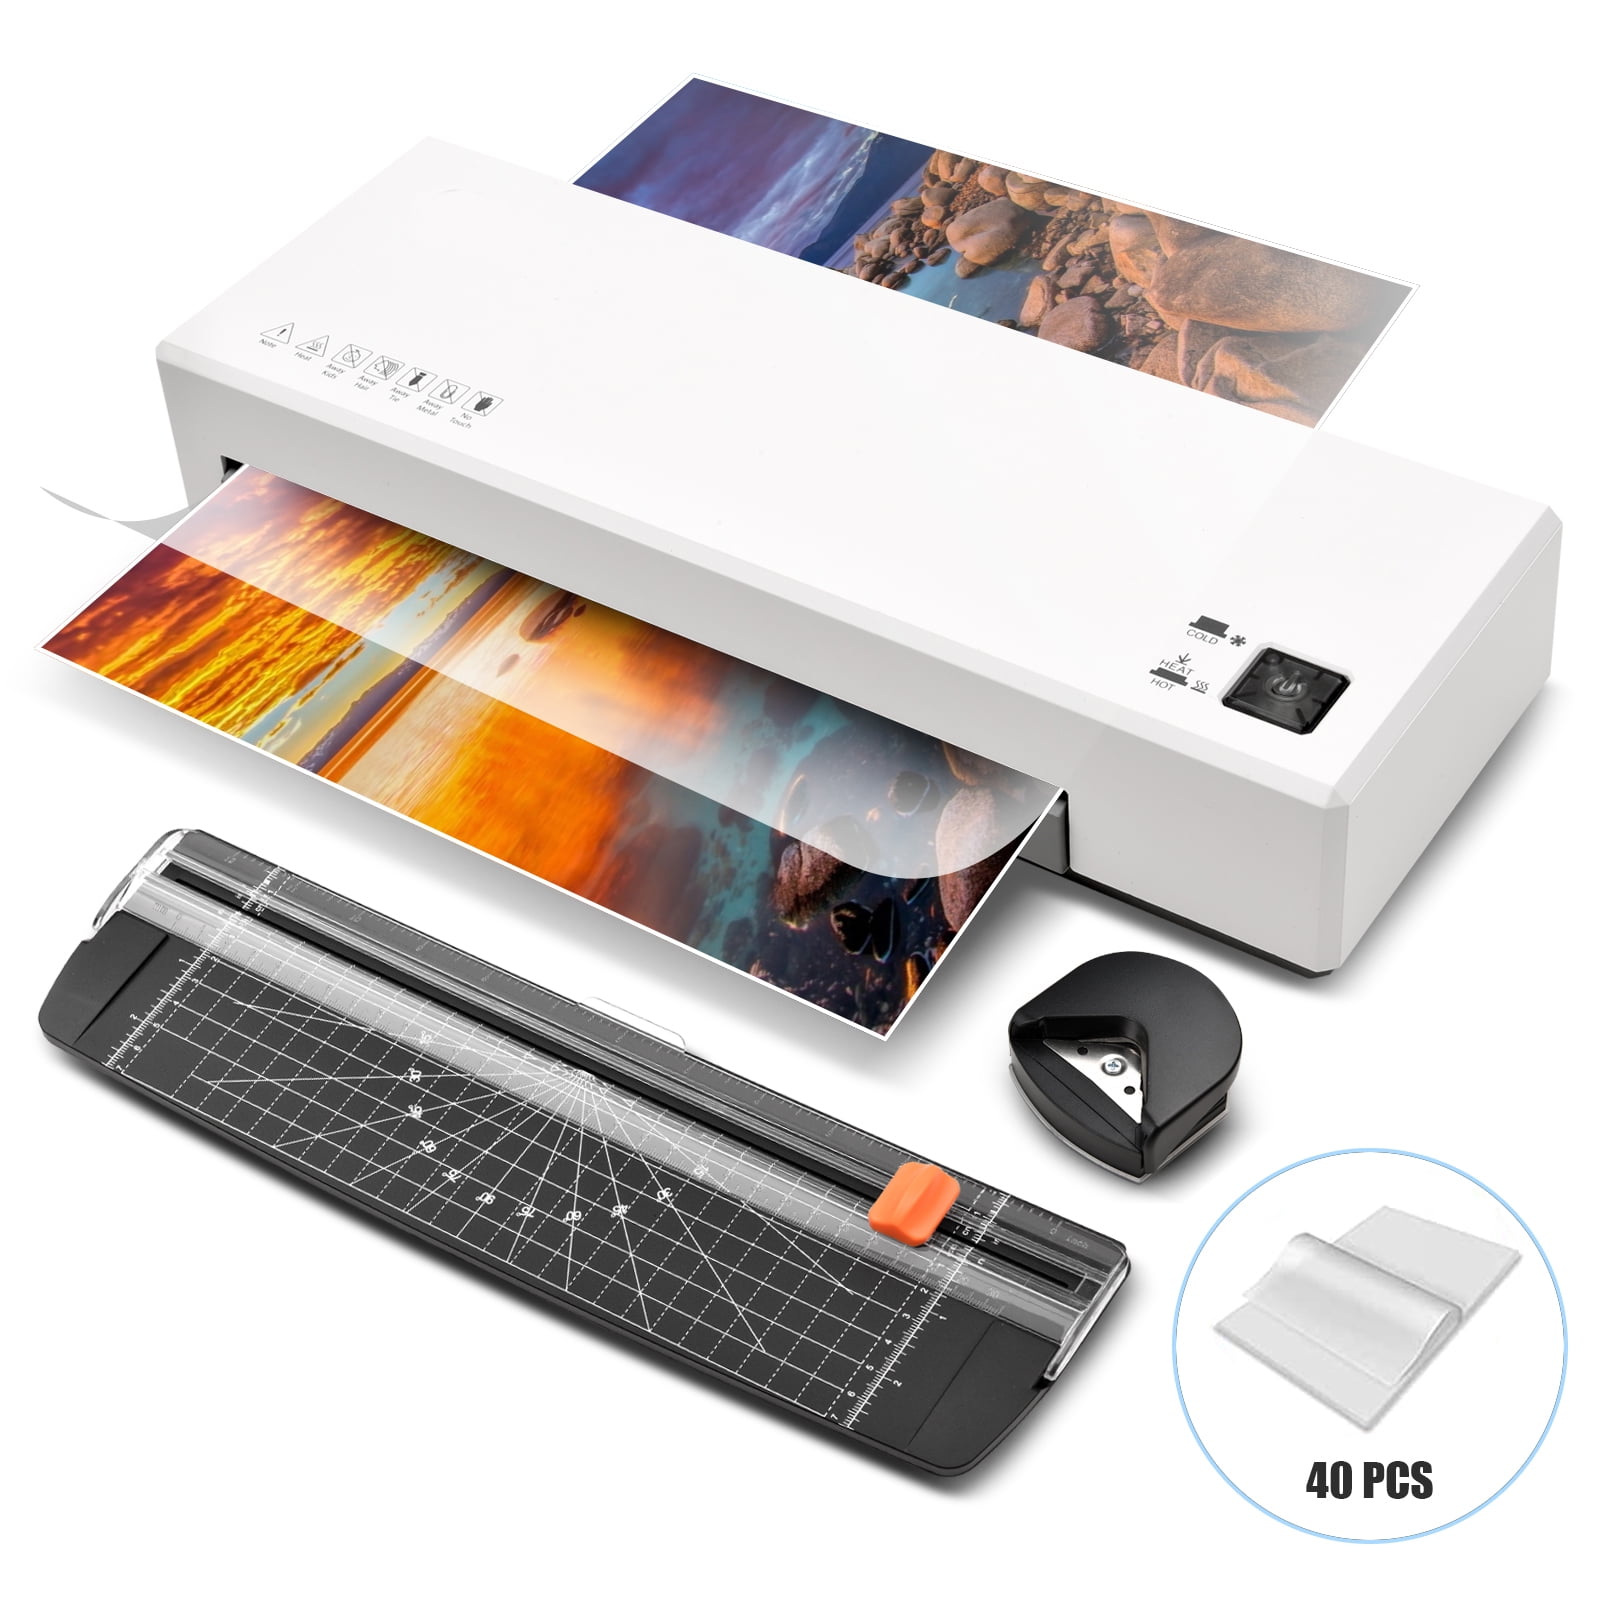 Laminator Machine, NICPOW A4 Laminating Machine,4 in 1 Thermal Laminator, 9  inches,30 Laminating Pouches, Paper Trimmer, Corner Rounder, Personal  Laminator for Home, School, Office 